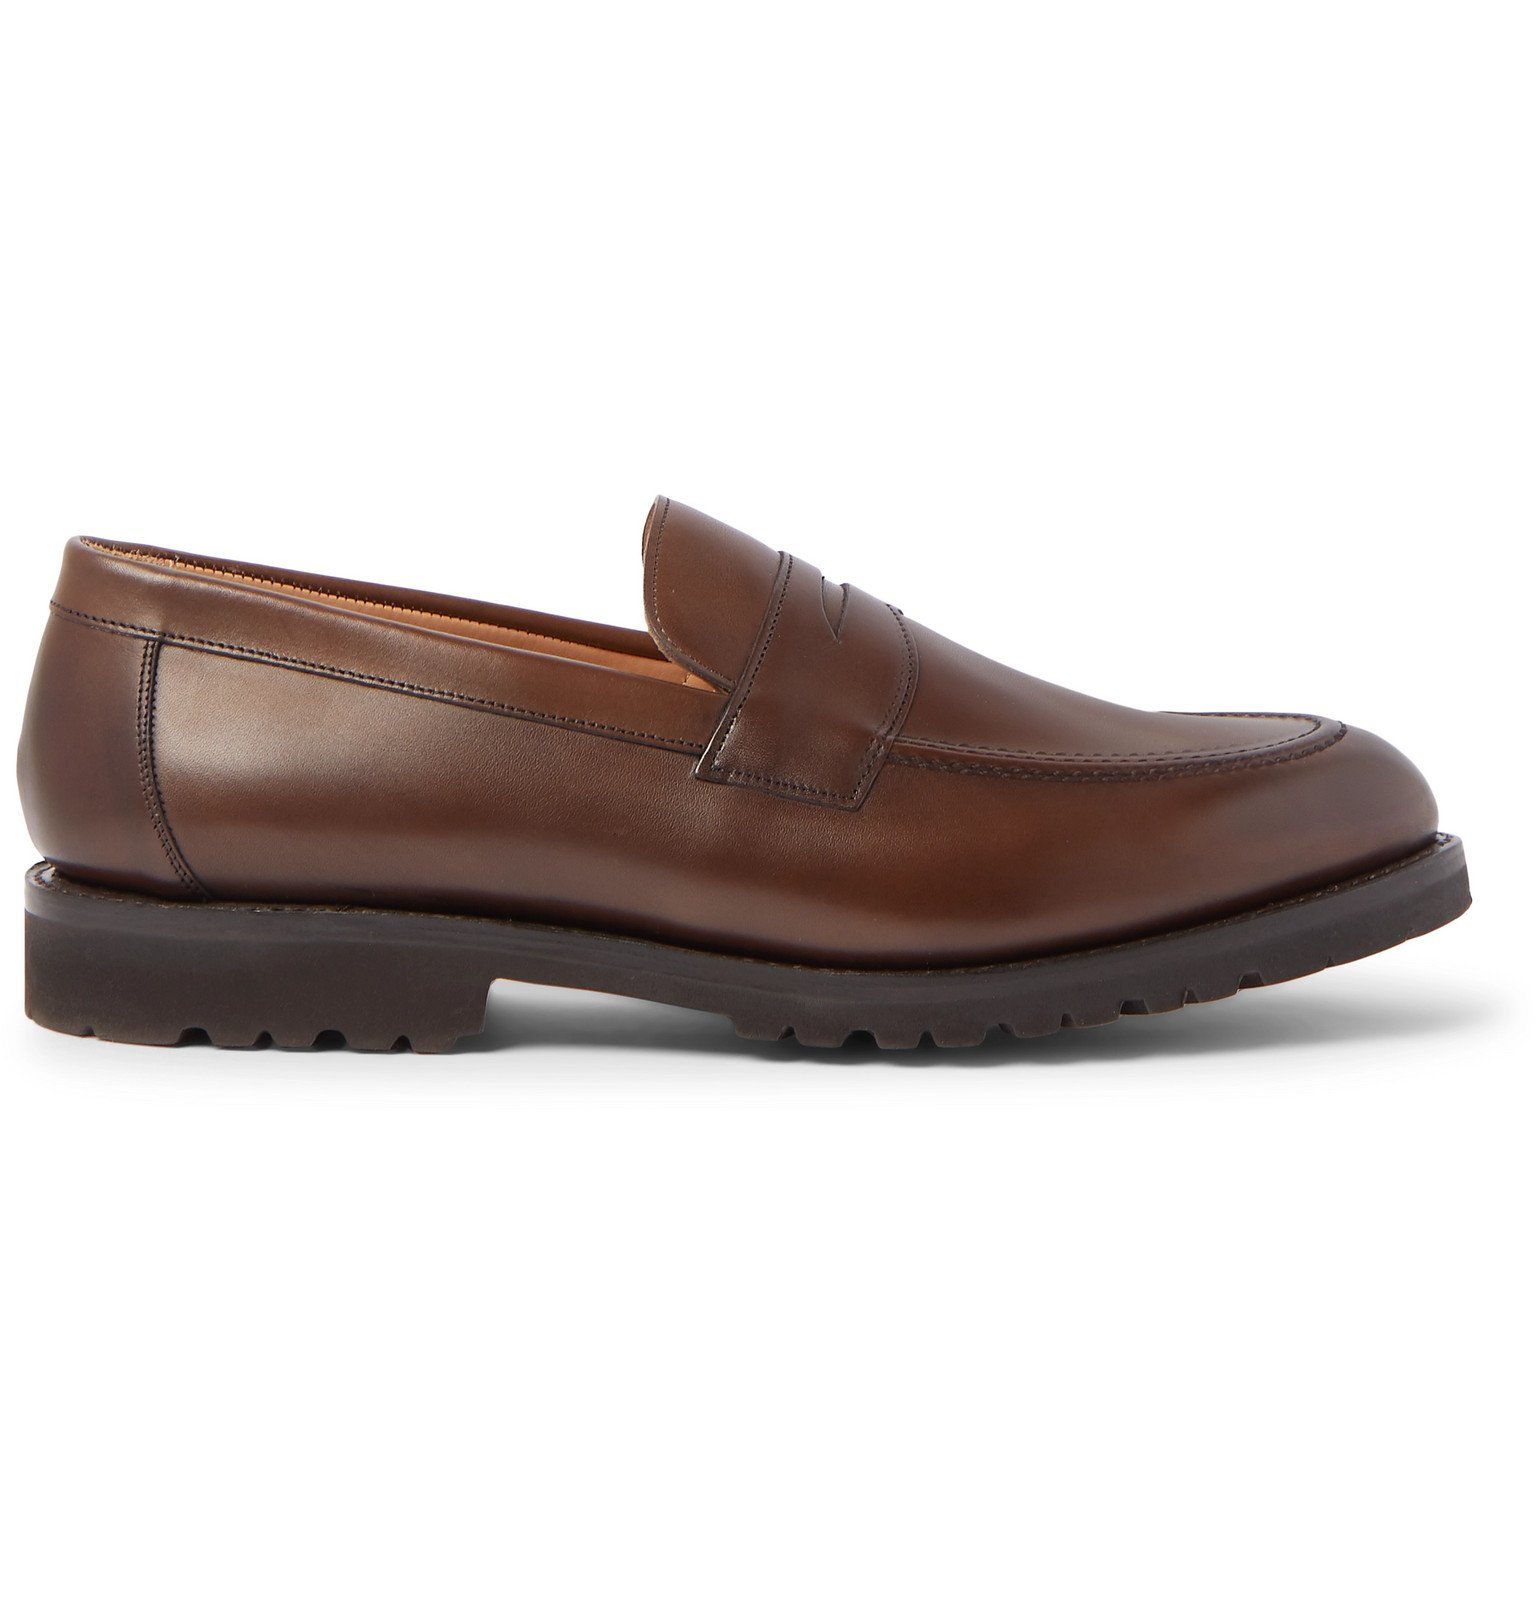 Cheaney - Hadley Burnished-Leather Penny Loafers - Brown Cheaney